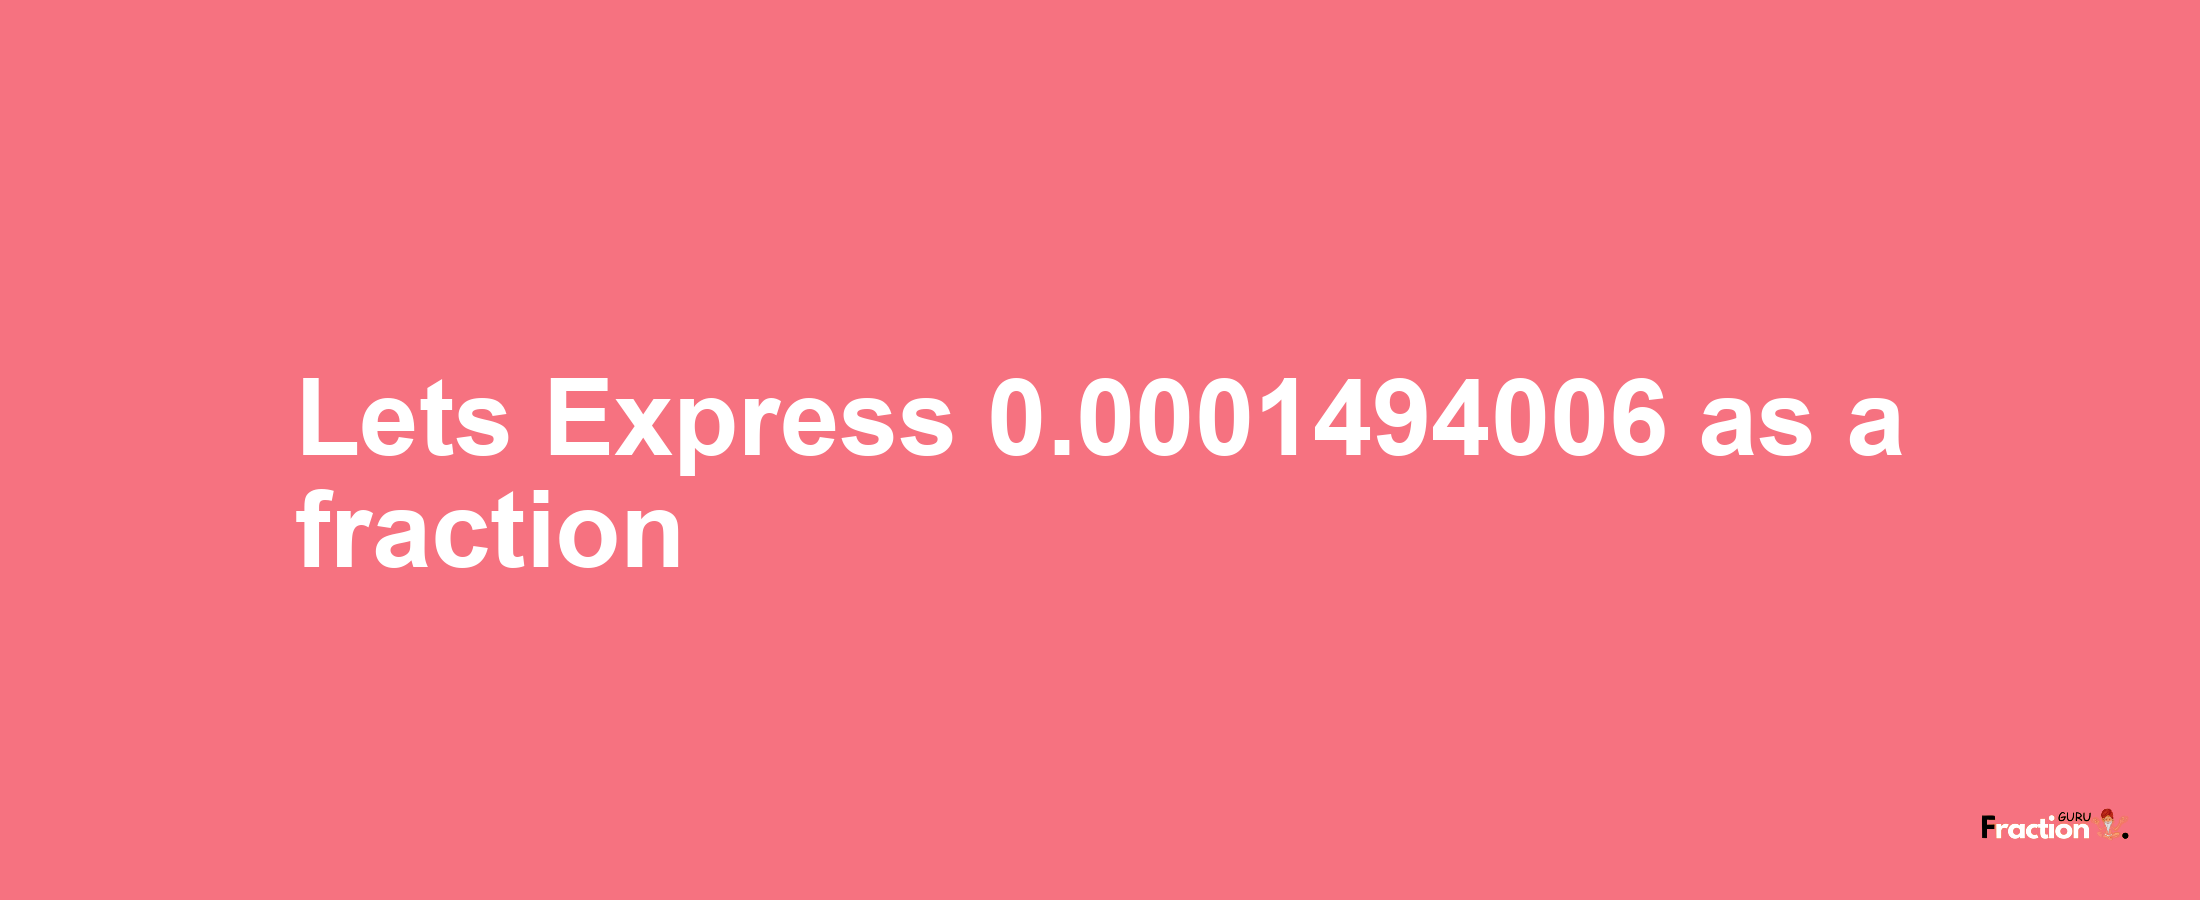 Lets Express 0.0001494006 as afraction